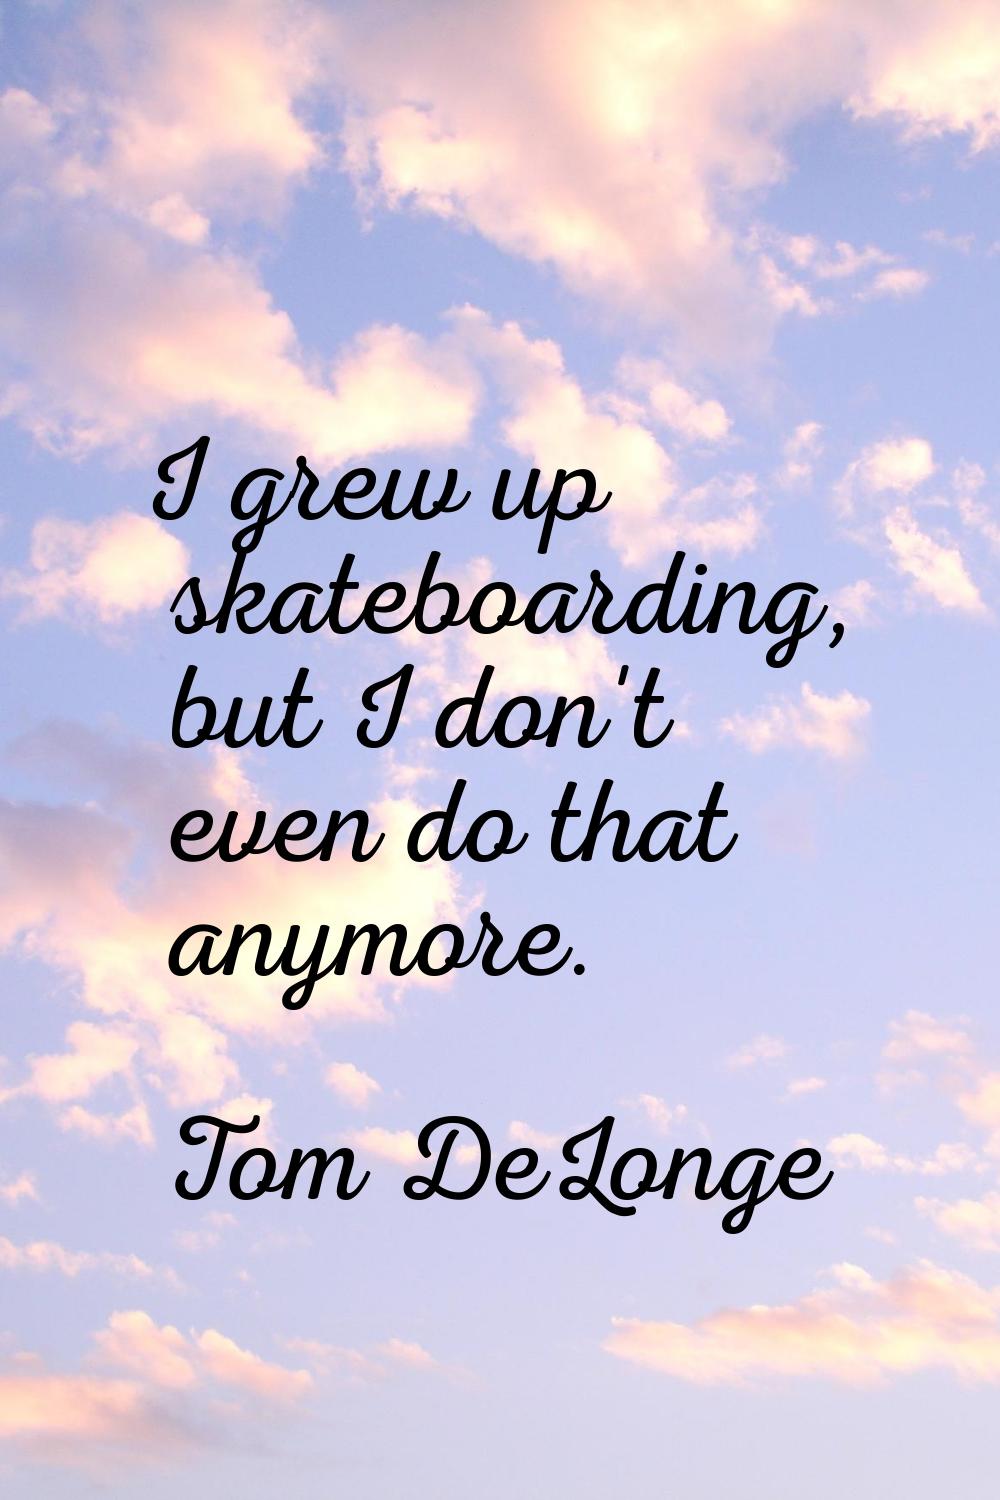 I grew up skateboarding, but I don't even do that anymore.